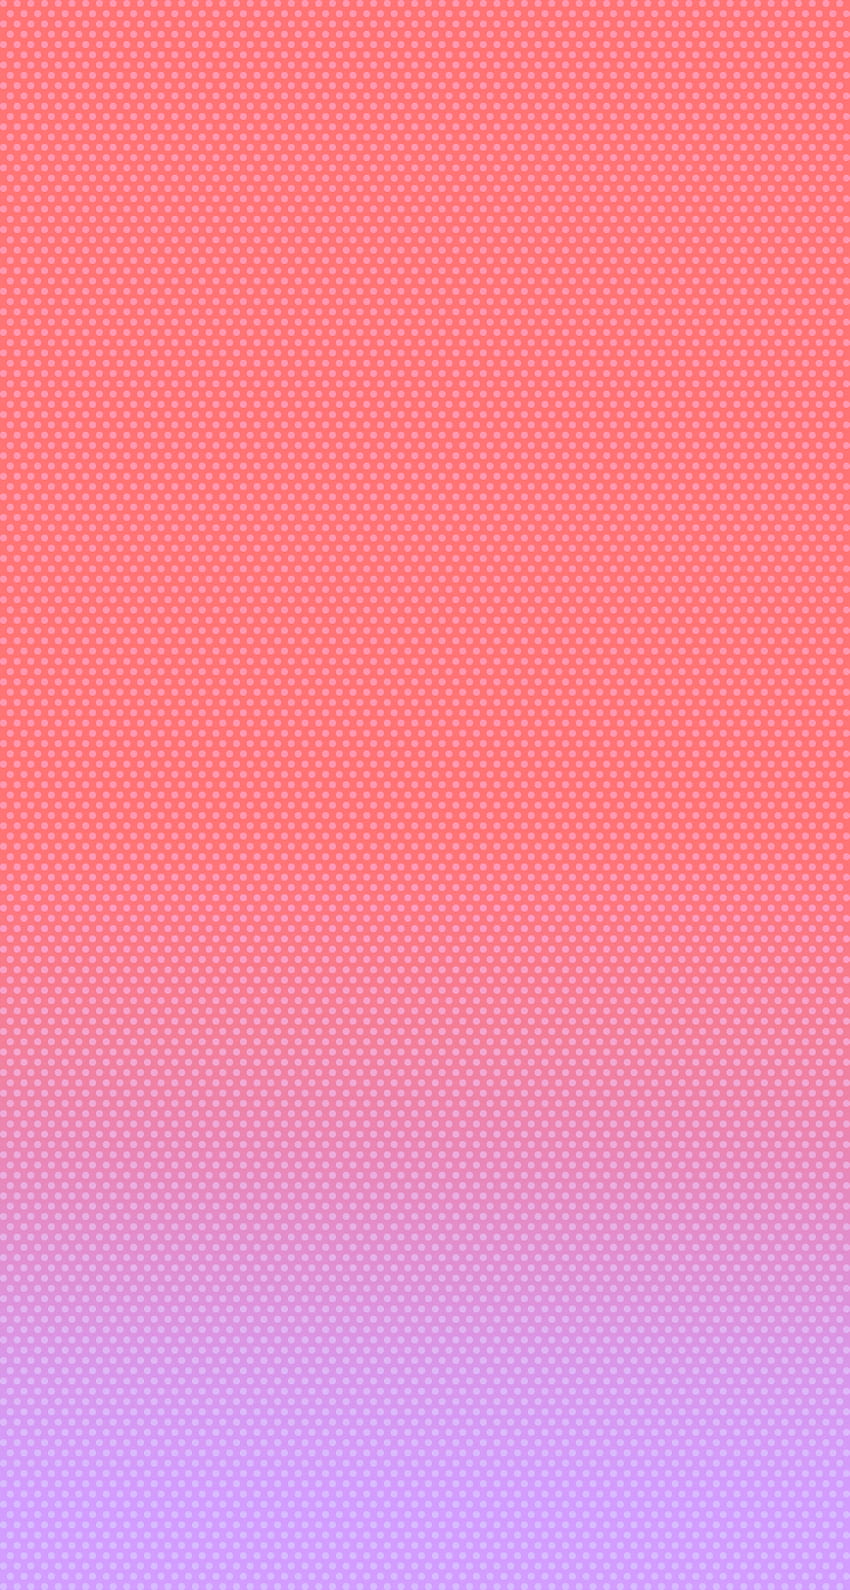 the new iOS 7 now, Pink Dynamic HD phone wallpaper